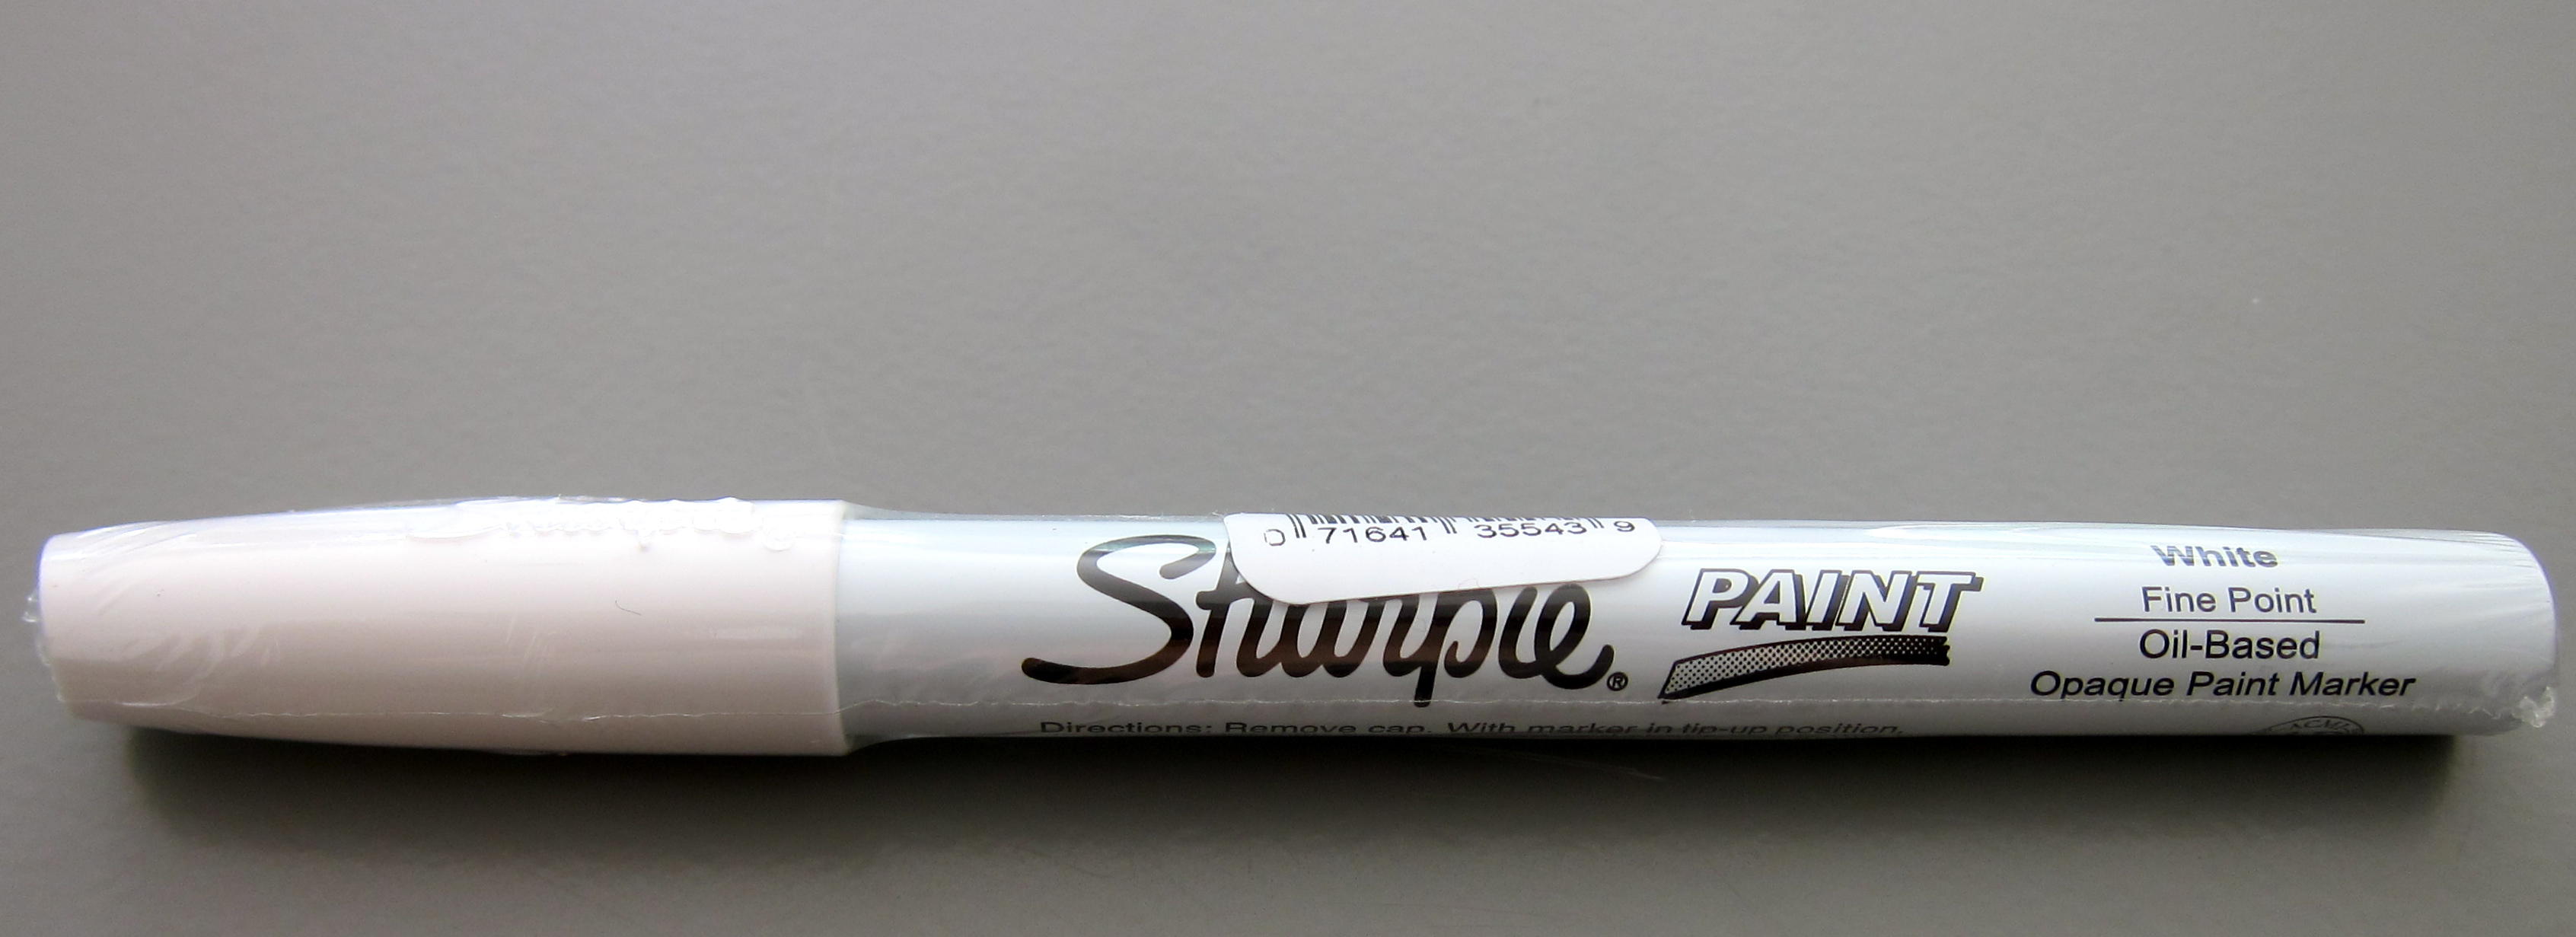 REVIEW: Sharpie White Paint Marker